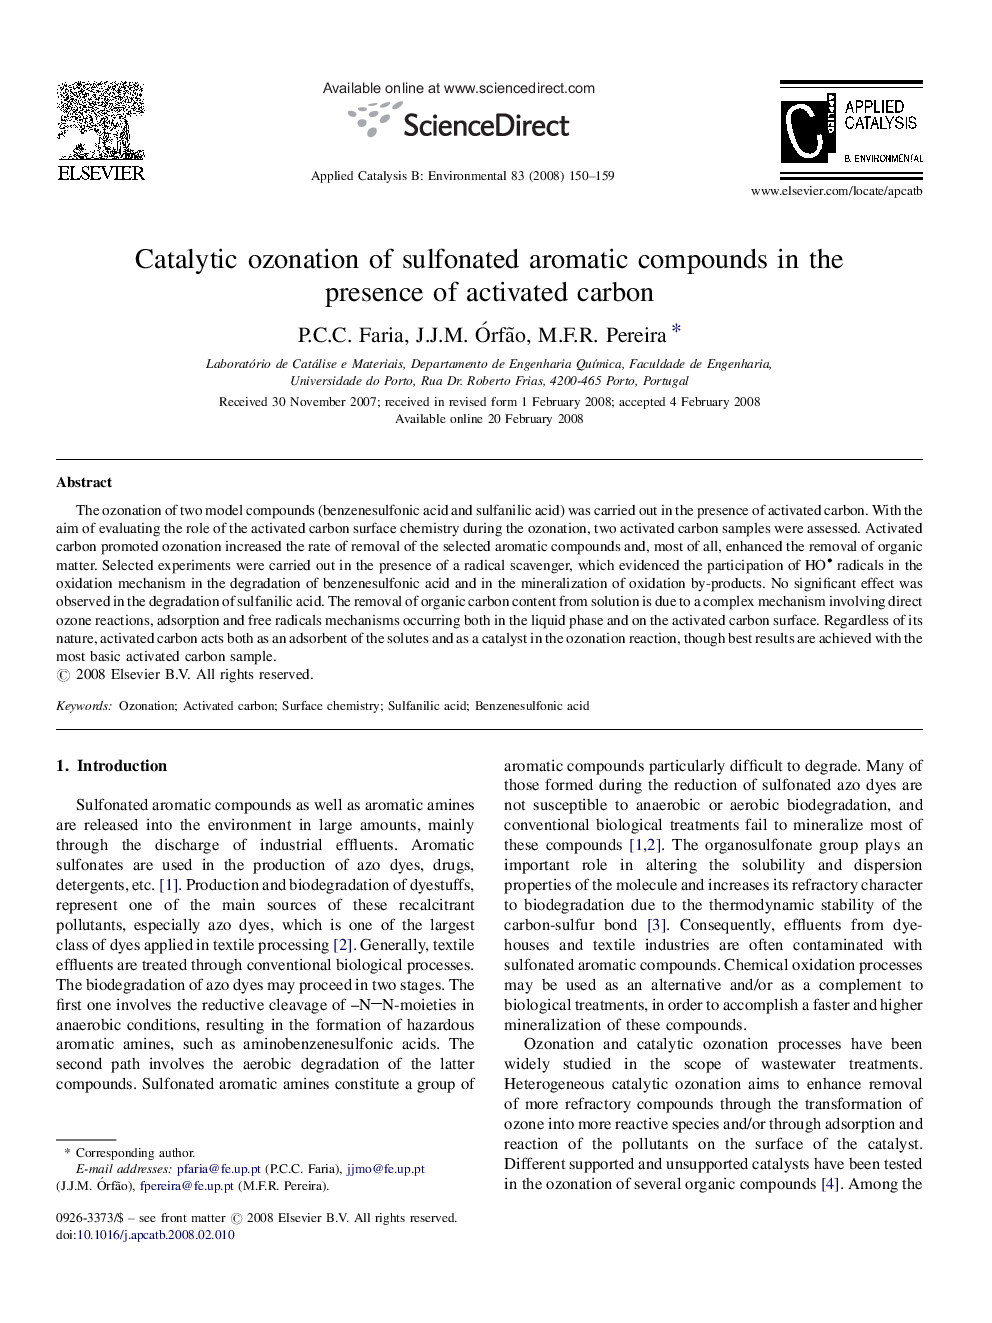 Catalytic ozonation of sulfonated aromatic compounds in the presence of activated carbon